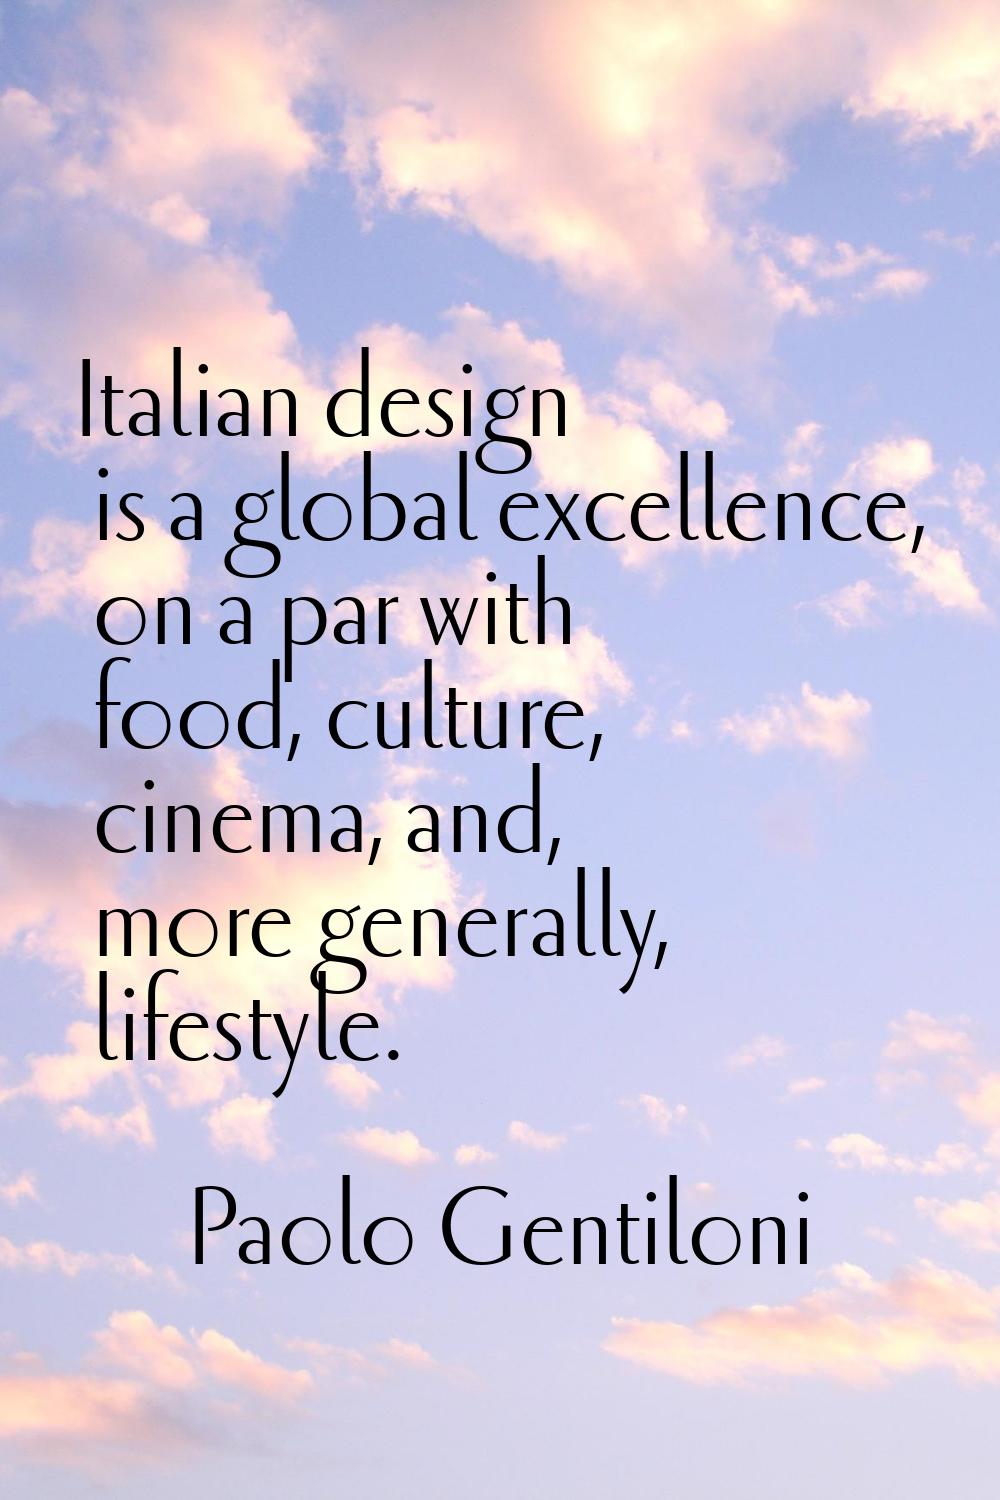 Italian design is a global excellence, on a par with food, culture, cinema, and, more generally, li